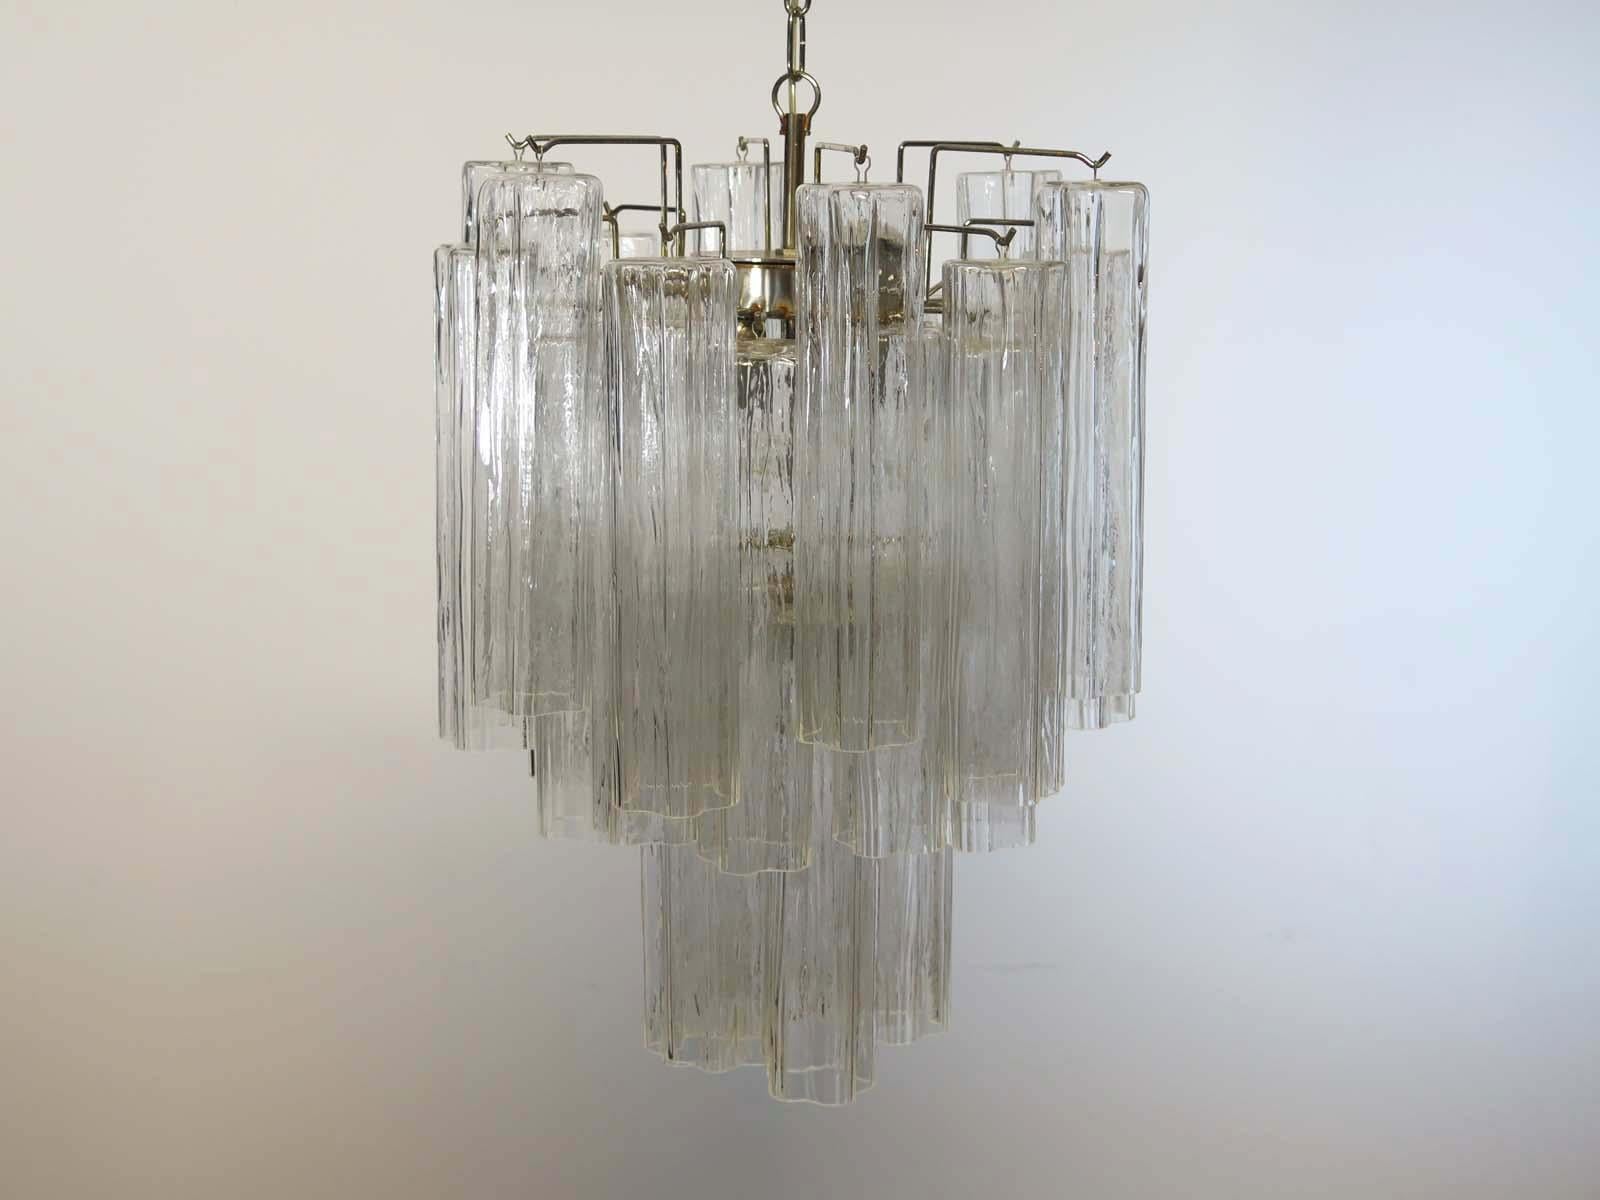 Pair of Italian vintage chandelier in Murano glass and nickel-plated metal structure. The armor polished nickel supports 30 large clear glass tubes in a star shape.
Period: 1960s
Dimensions: 47.25 inches (120 cm) height with chain, 24.80 inches (63